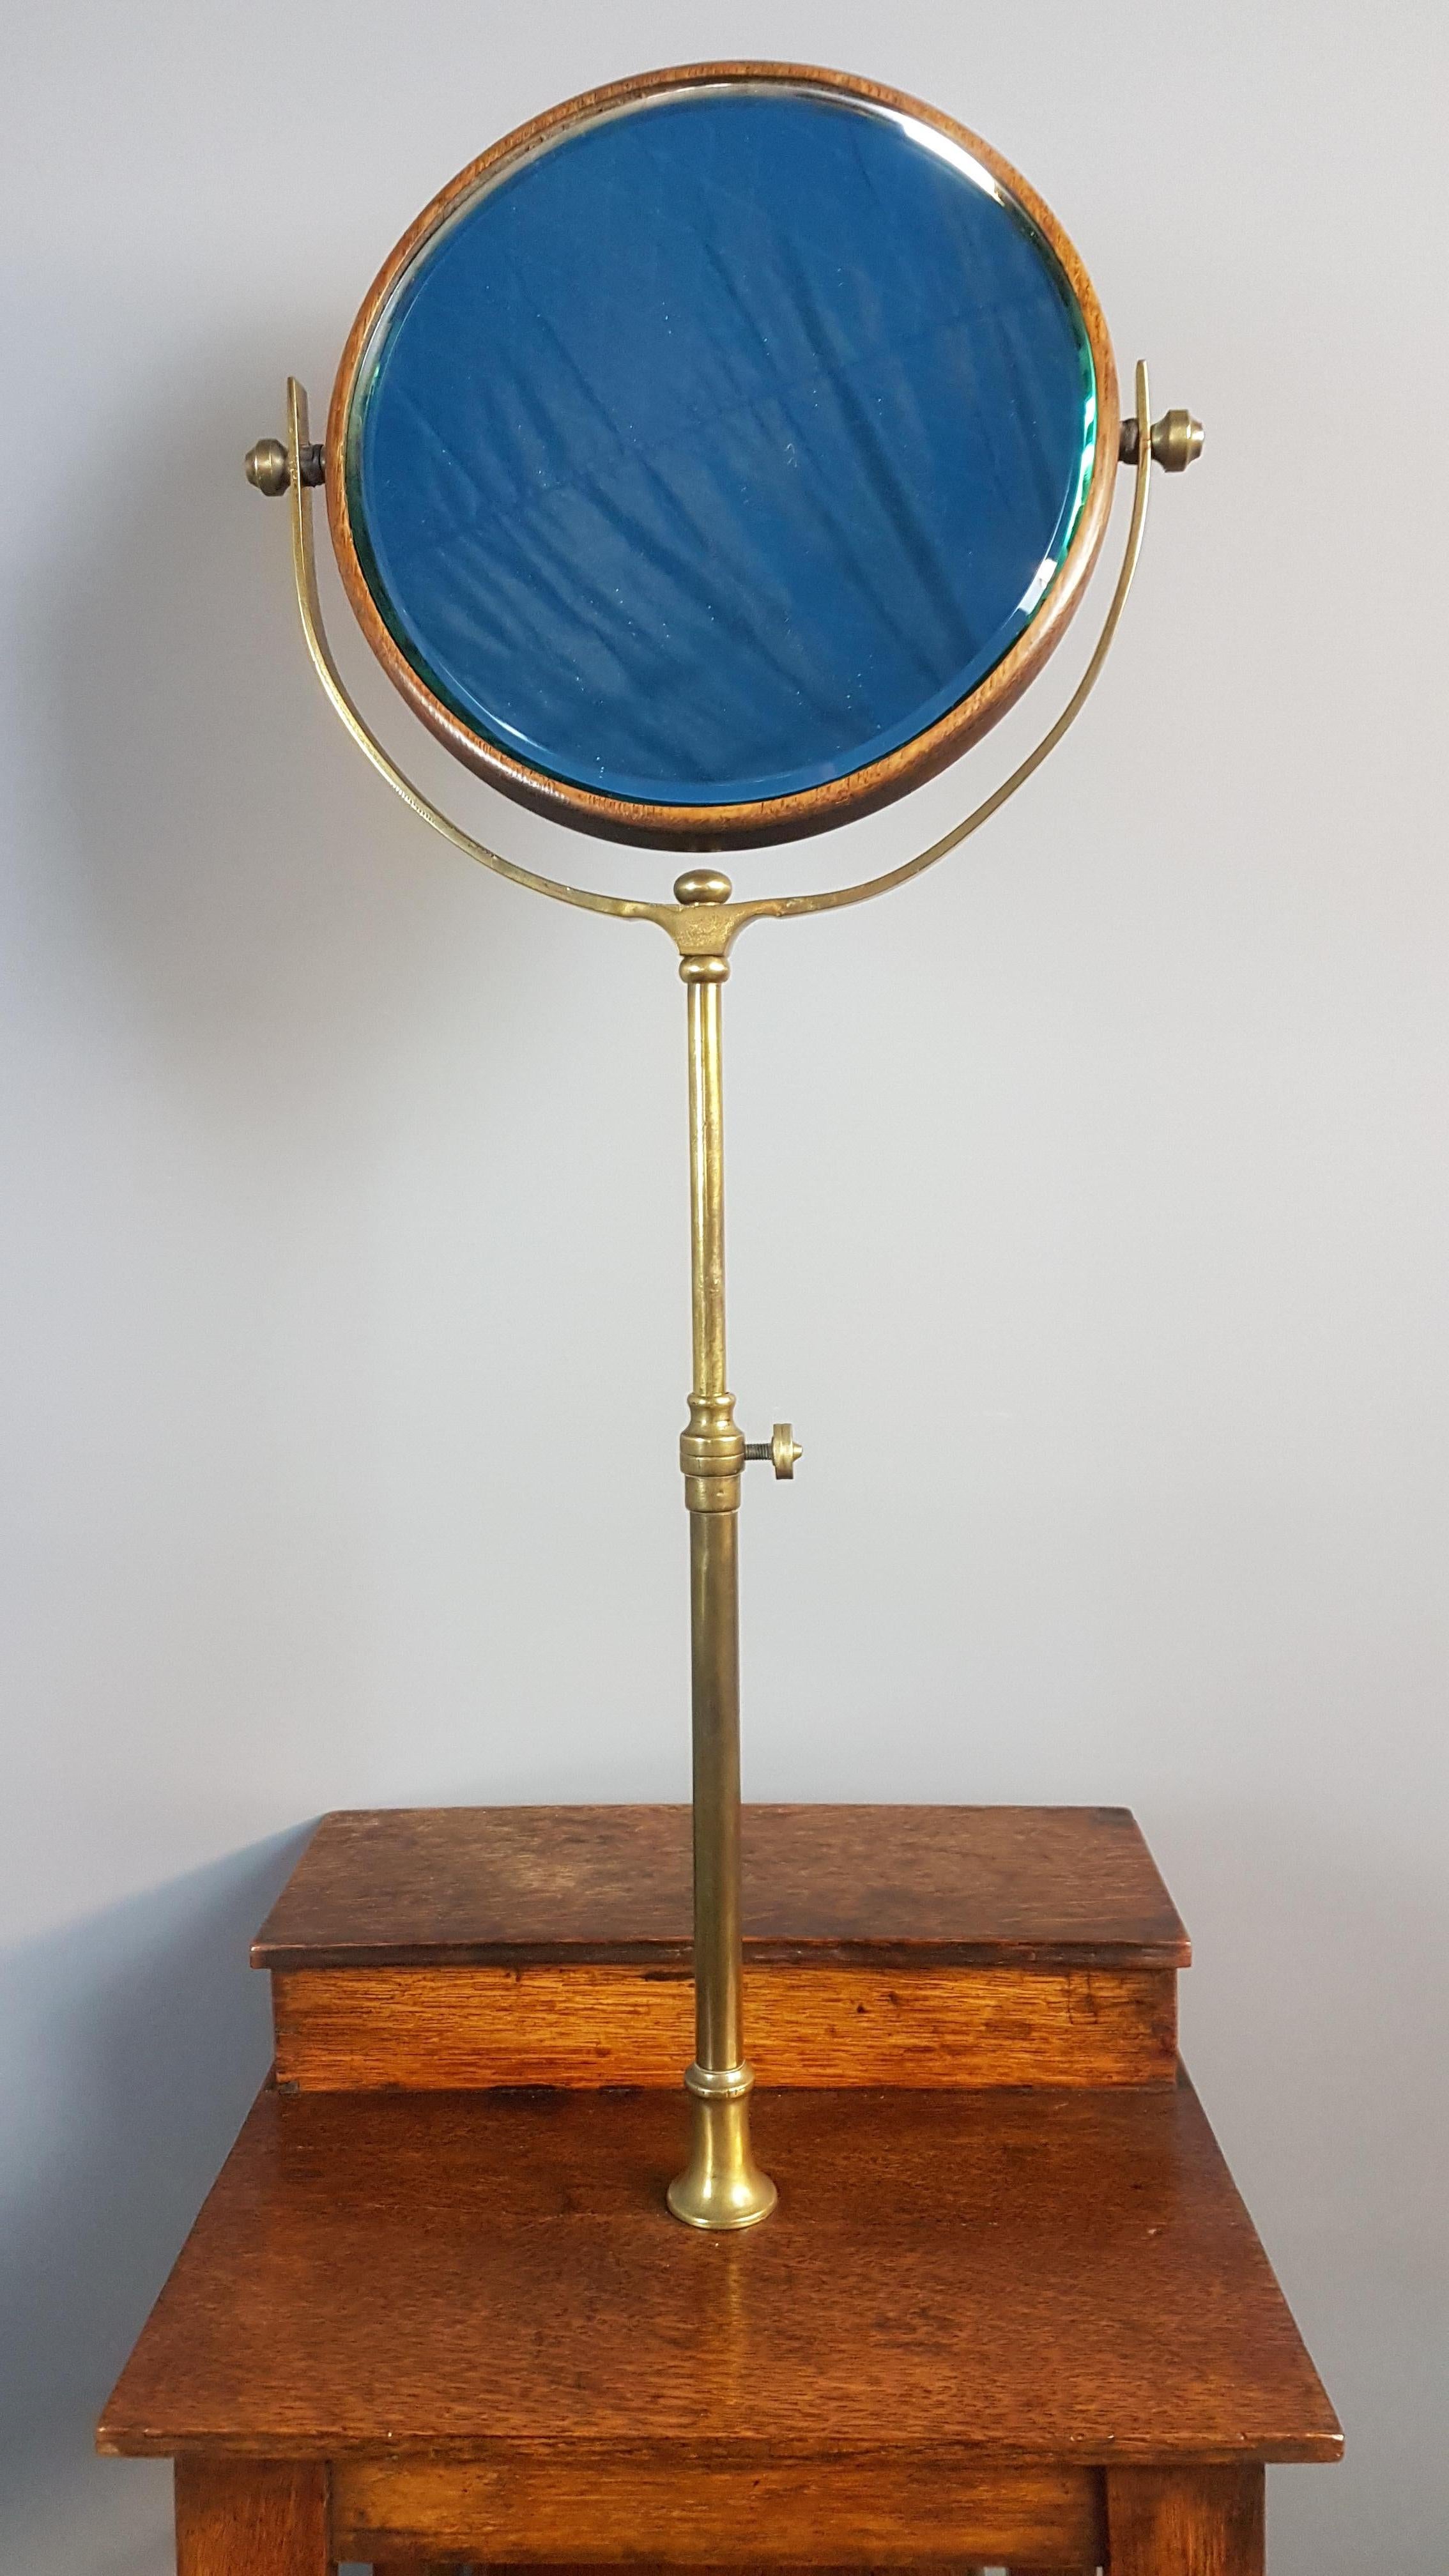 Early 20th Century Arts & Crafts Shaving Stand in the Manner of Liberty’s, circa 1900 For Sale